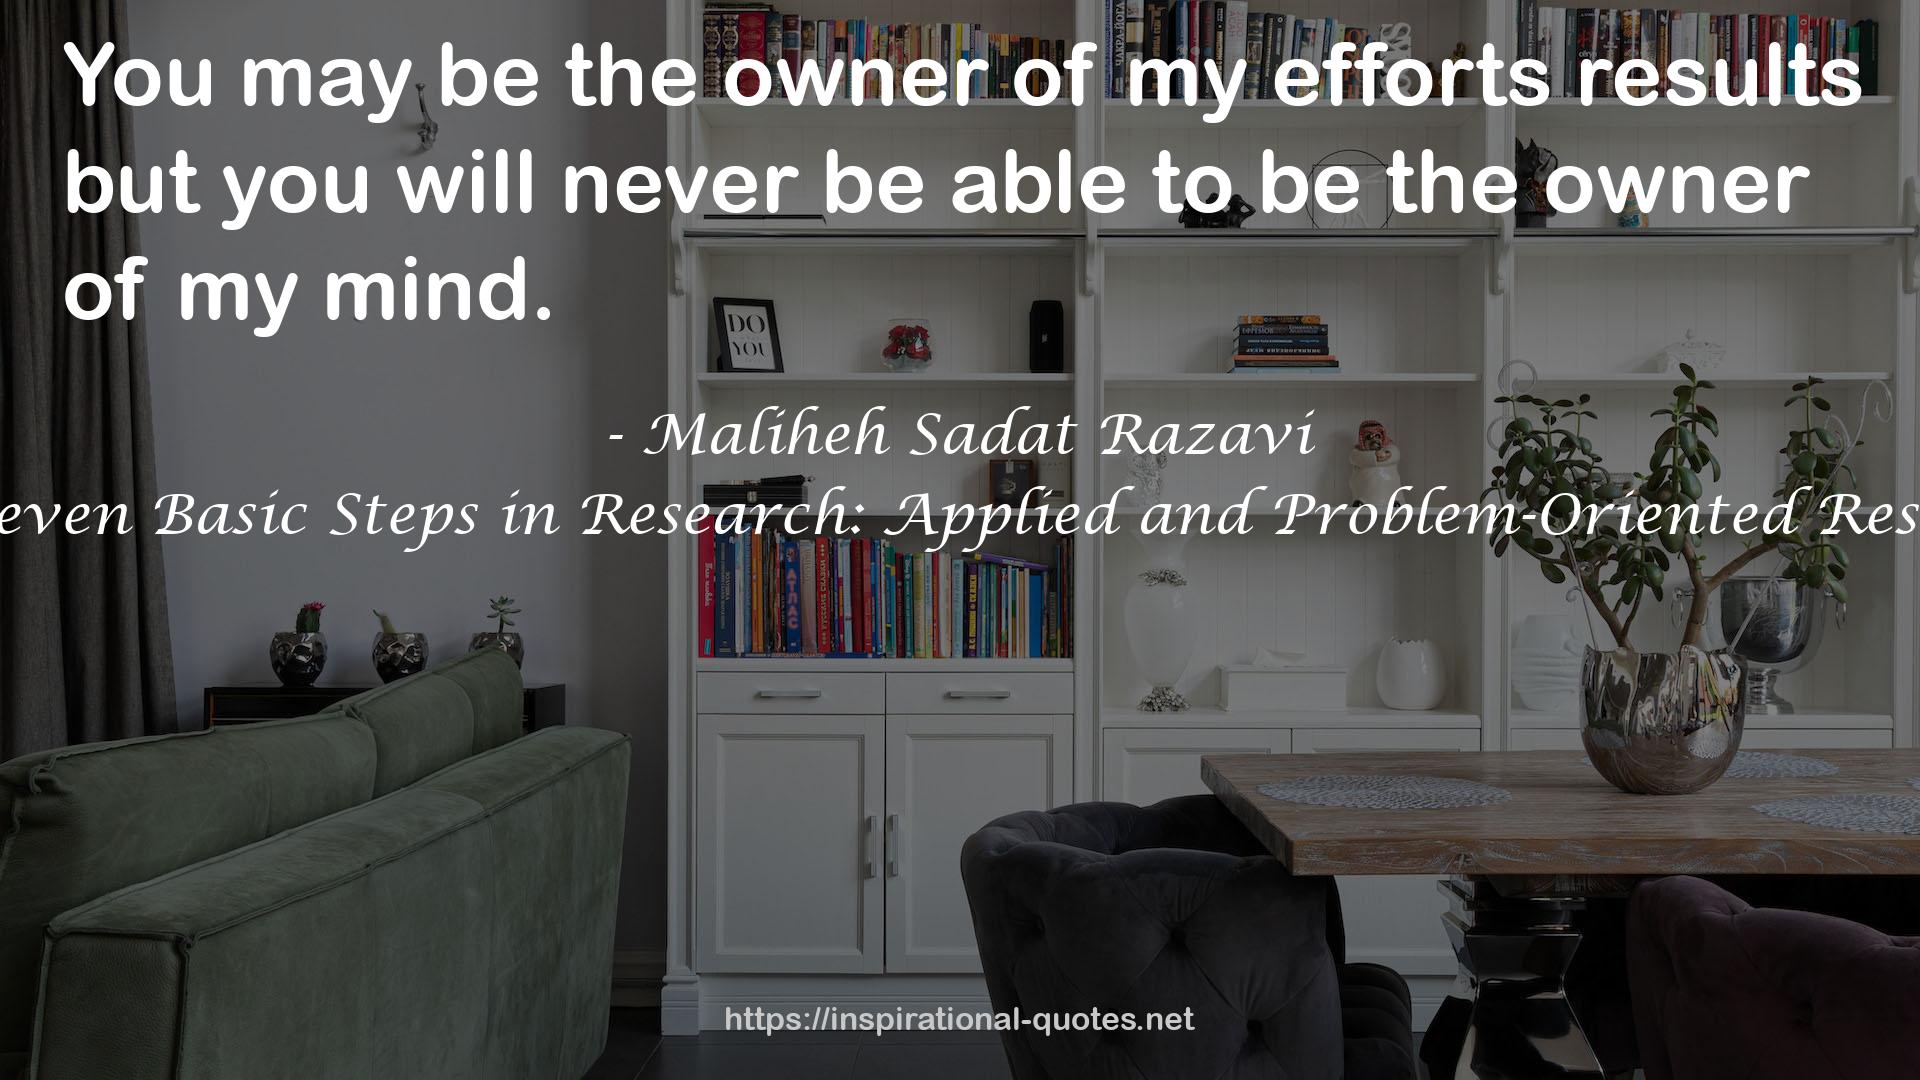 The Seven Basic Steps in Research: Applied and Problem-Oriented Research QUOTES